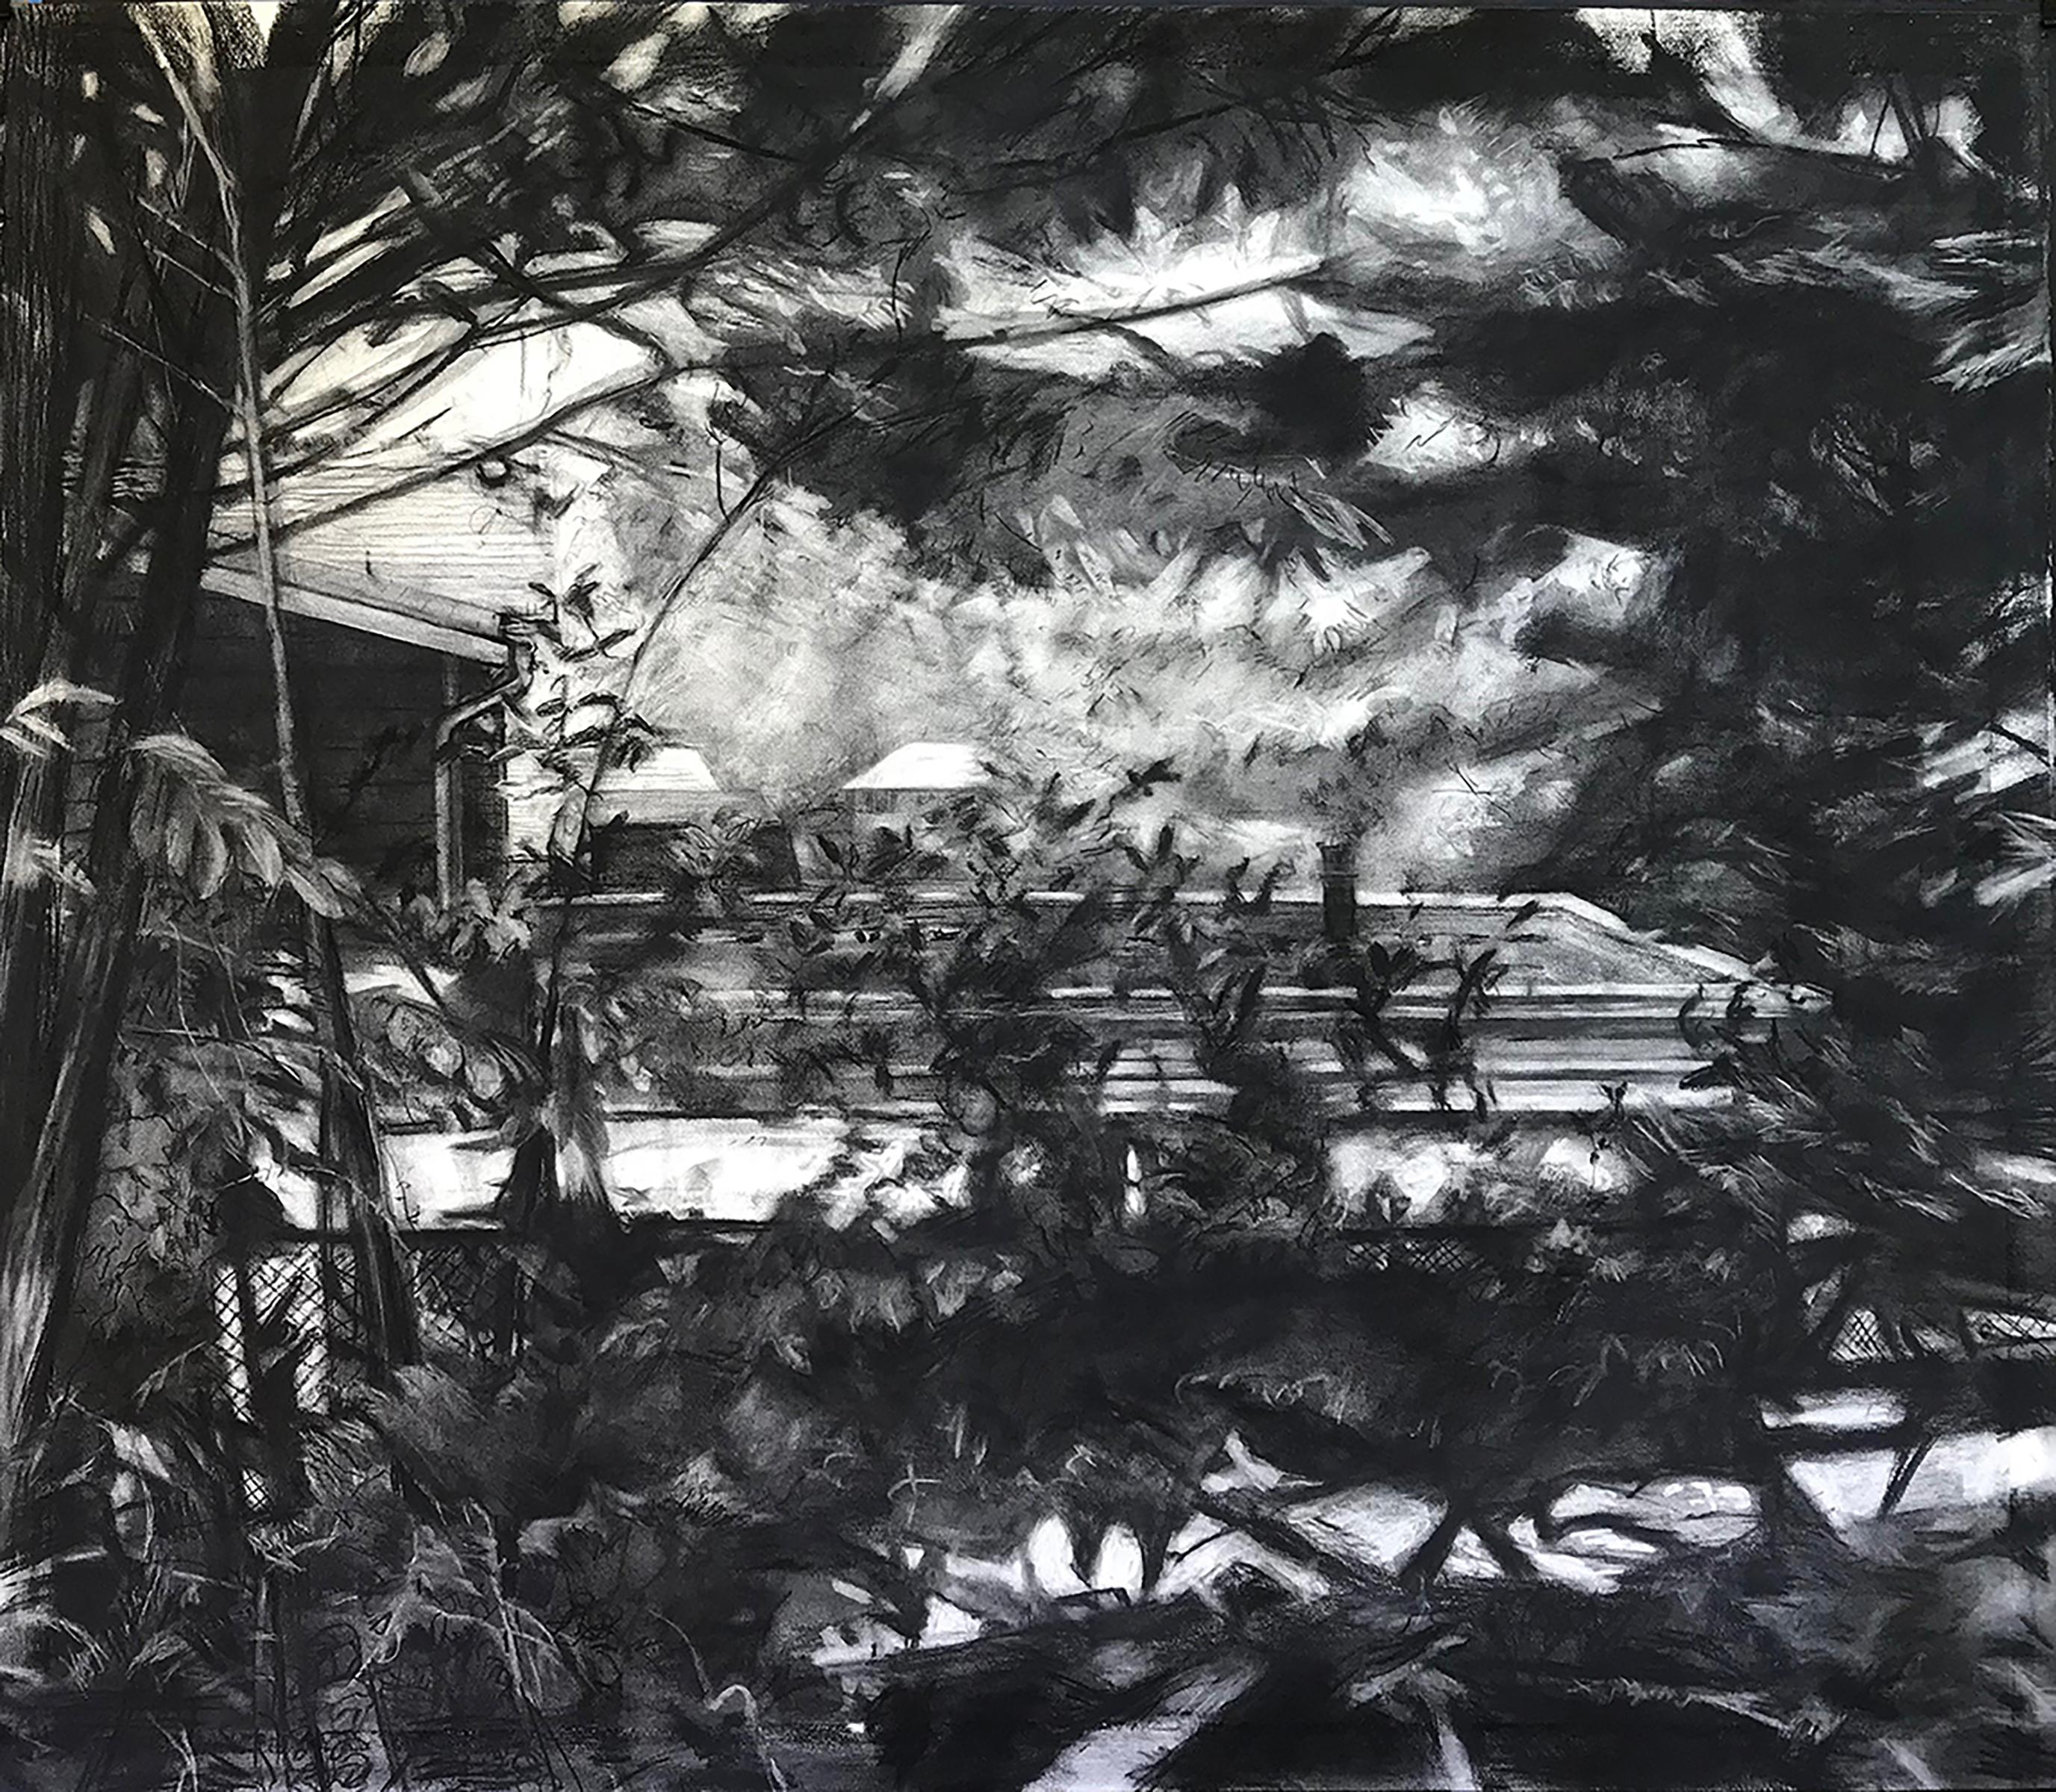 Eilis Crean Abstract Painting - "Home" - charcoal, nature, trees, large drawing, clack and white